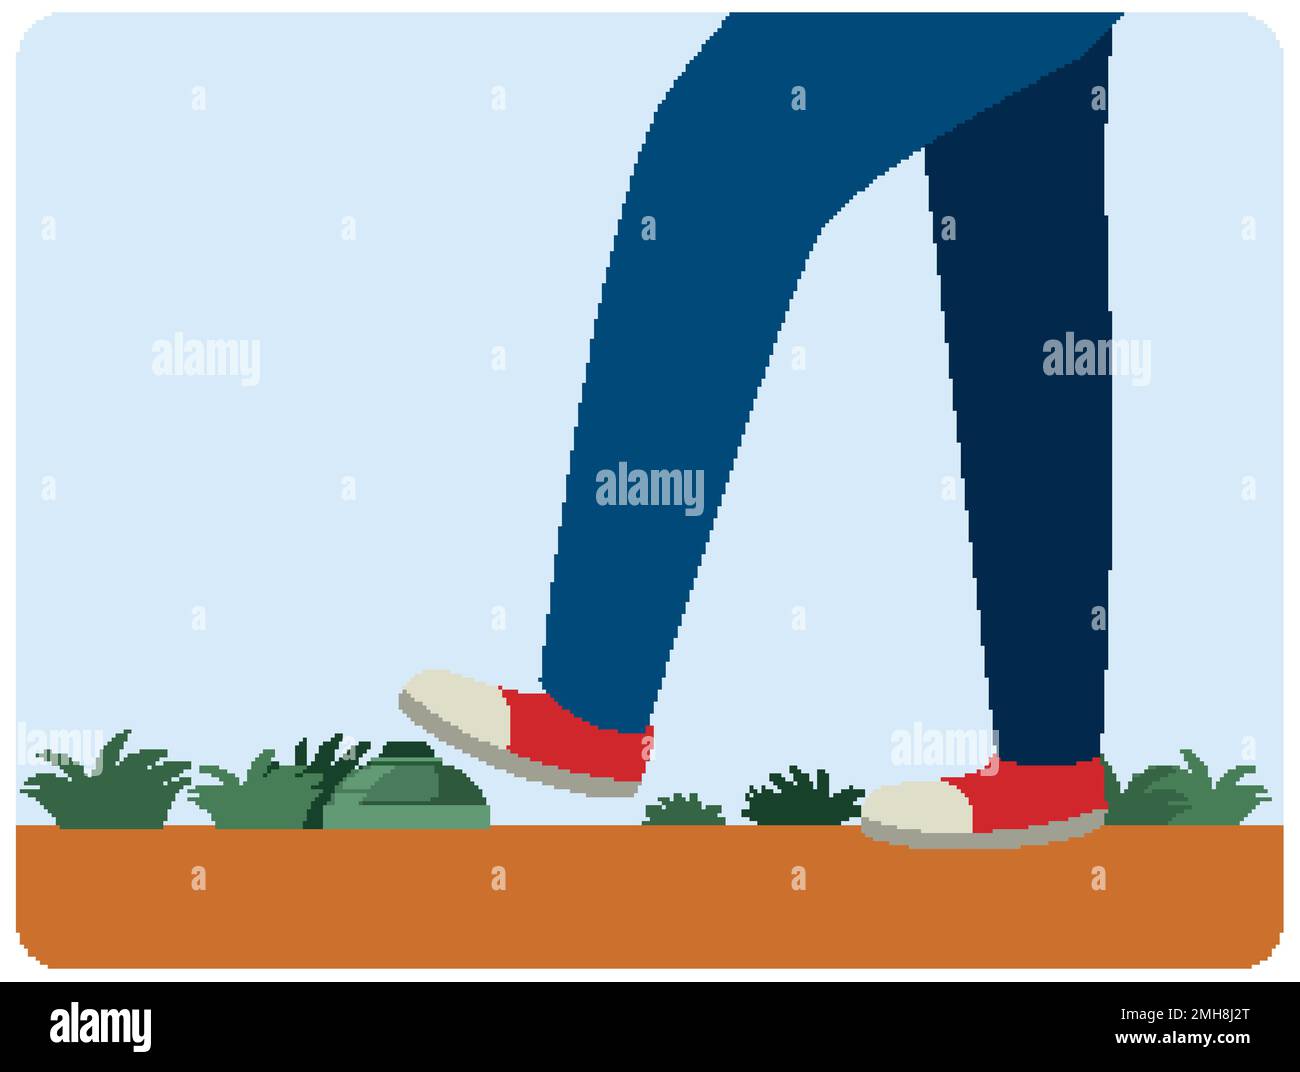 A man almost step on a landmine illustration Stock Vector